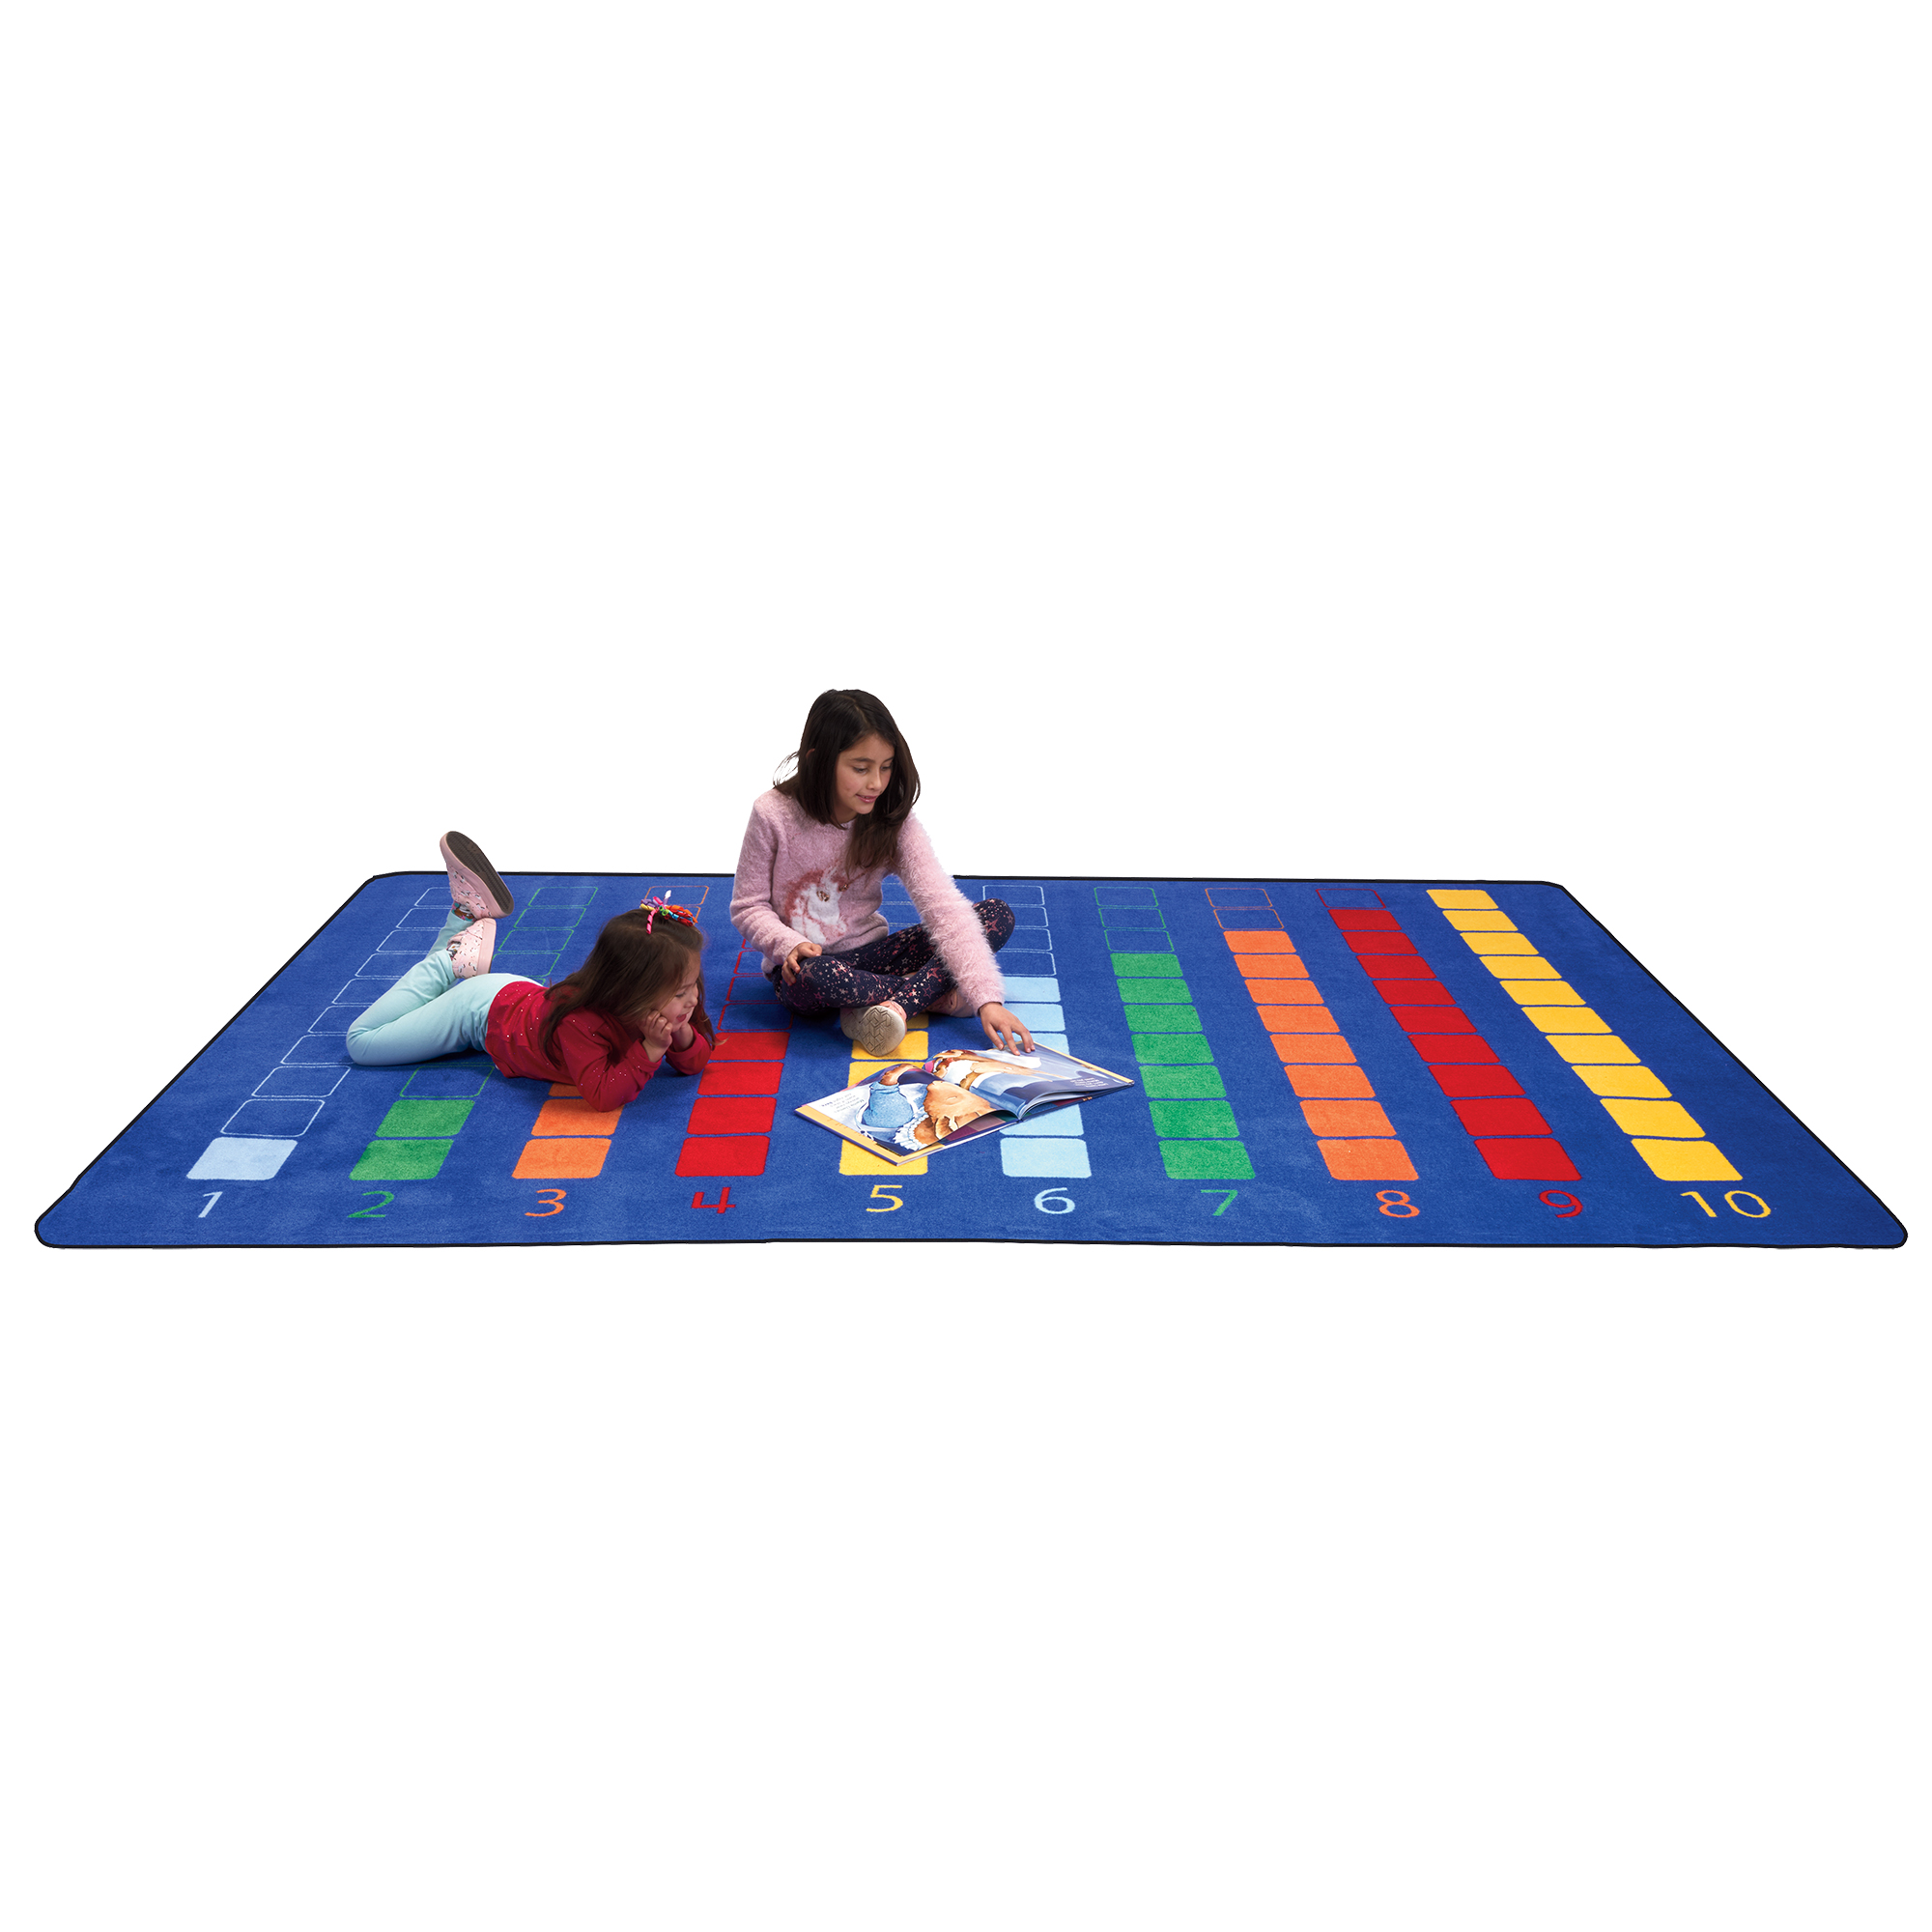 Counting Color Grid Rug - Rectangle Large